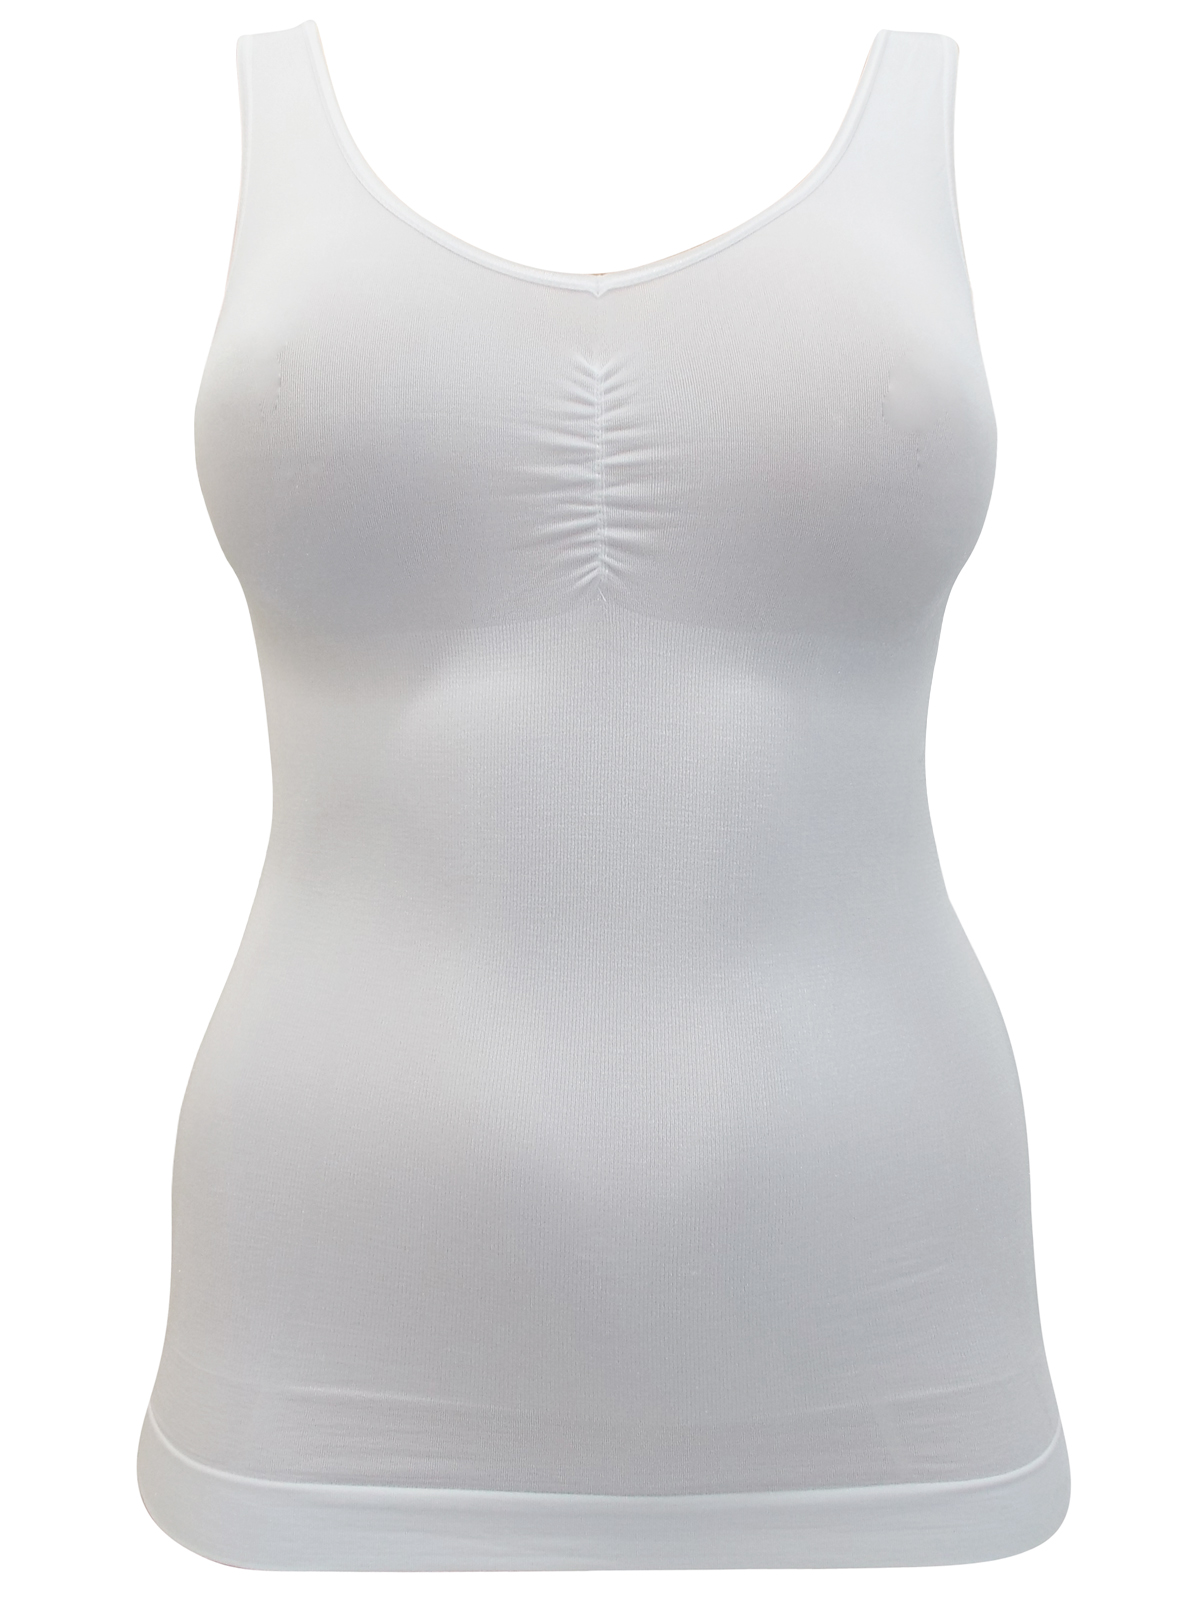 MS Mode - - MS Mode WHITE Body Shaping Vest Top - Size 14/16 to 26/28 (Medium to XXLarge)